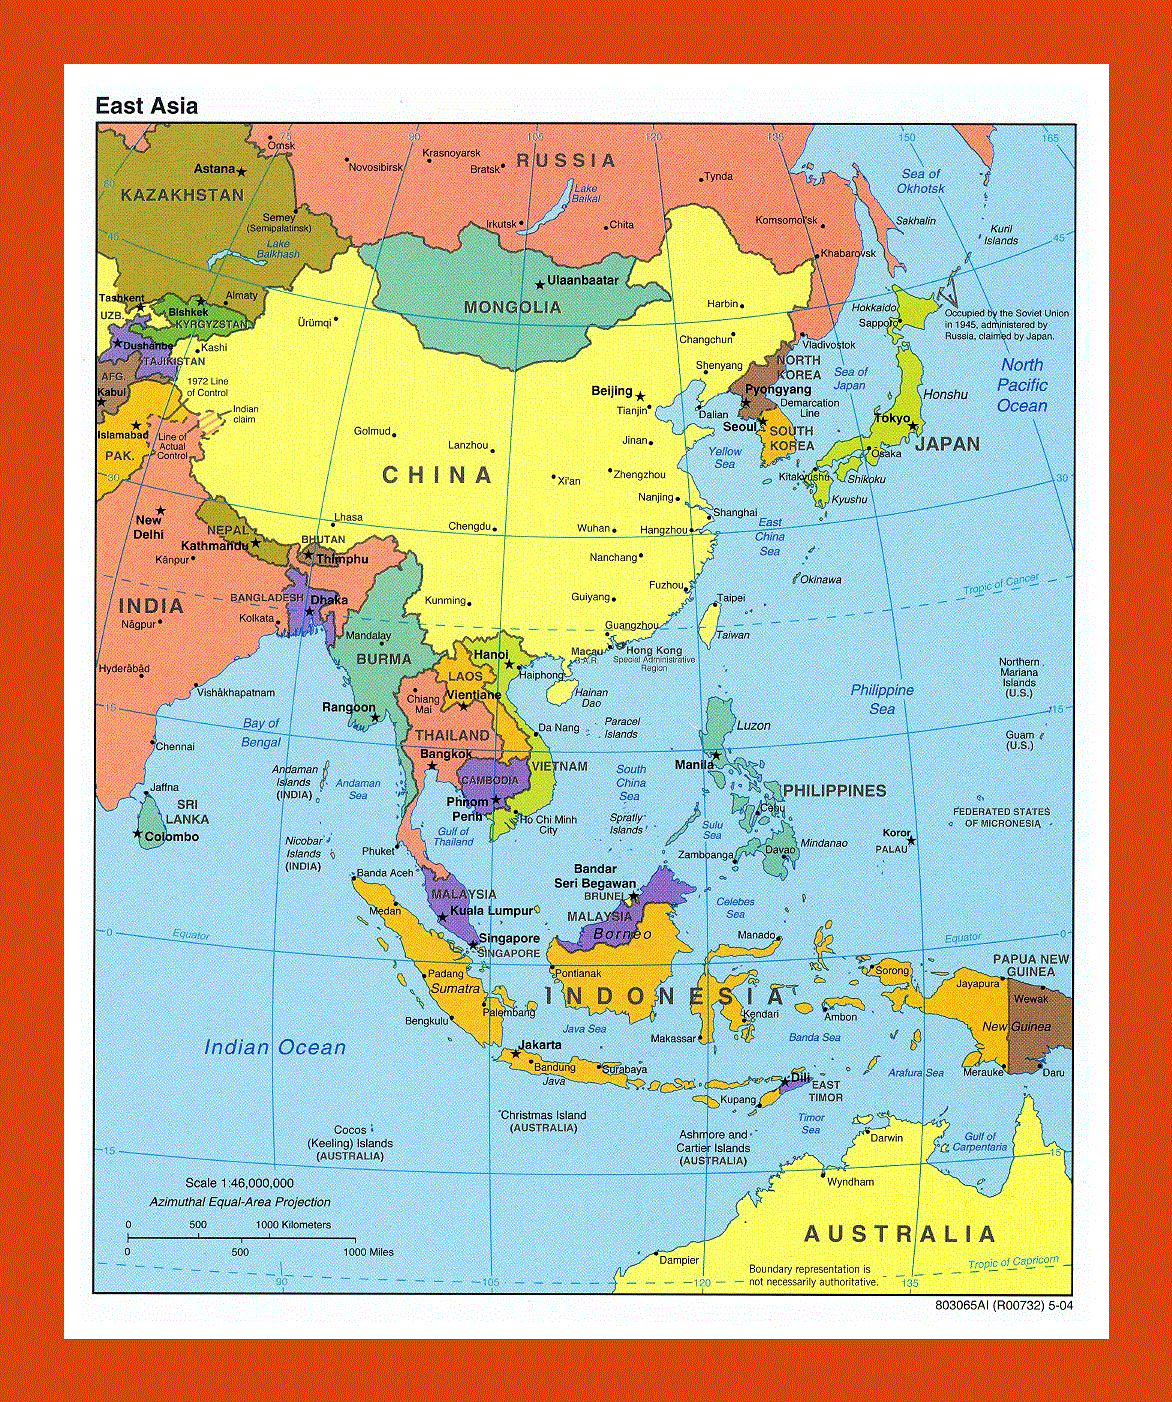 Political map of East Asia - 2004 | Maps of East Asia | Maps of Asia ...